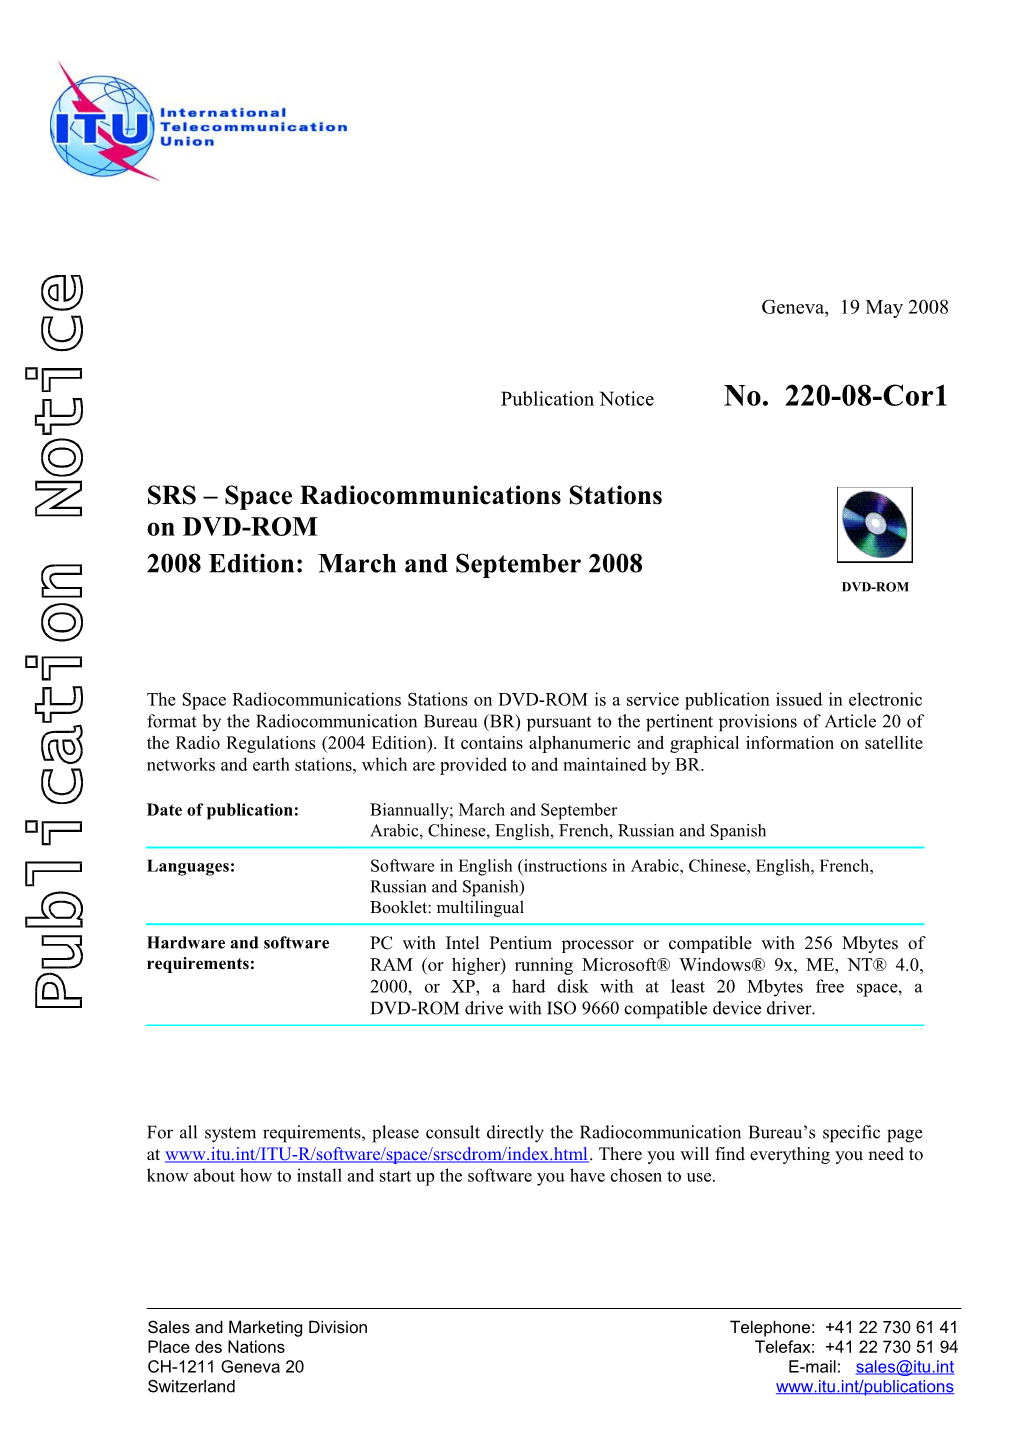 Publication Notice No. 220-08 SRS Space Radiocommunications Stations on DVD-ROM 2008 Edition